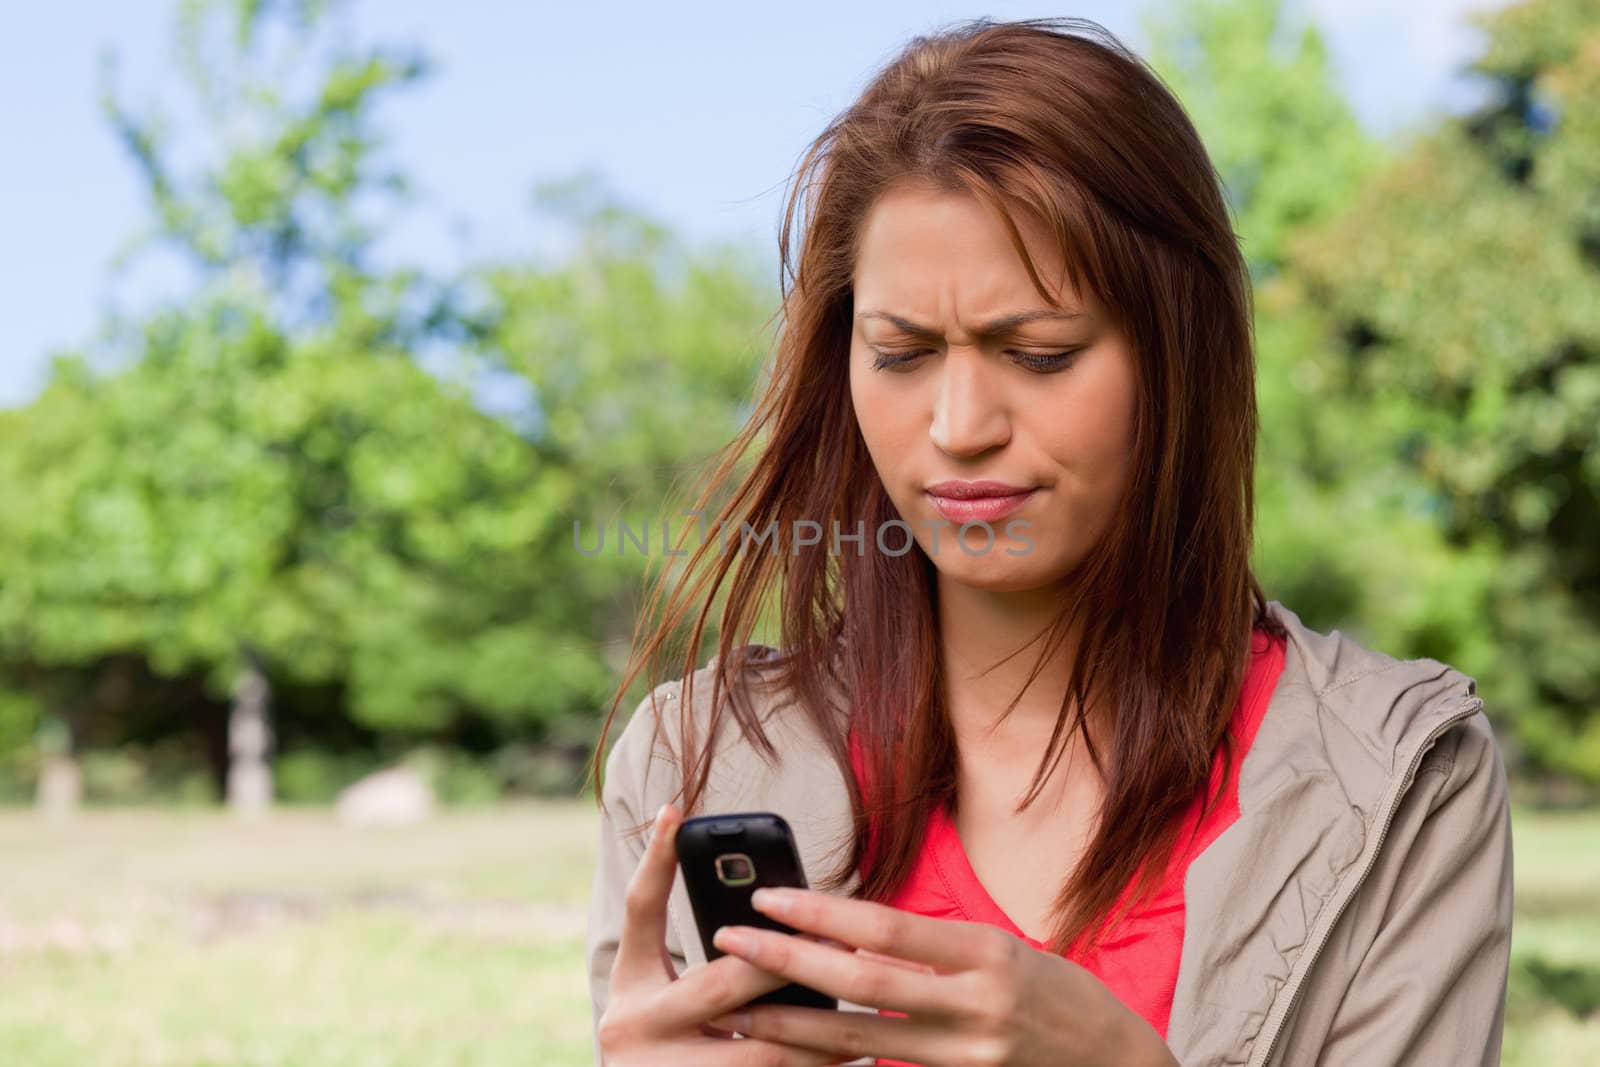 Woman with a cautious expression reading a text message in a bright parkland area 